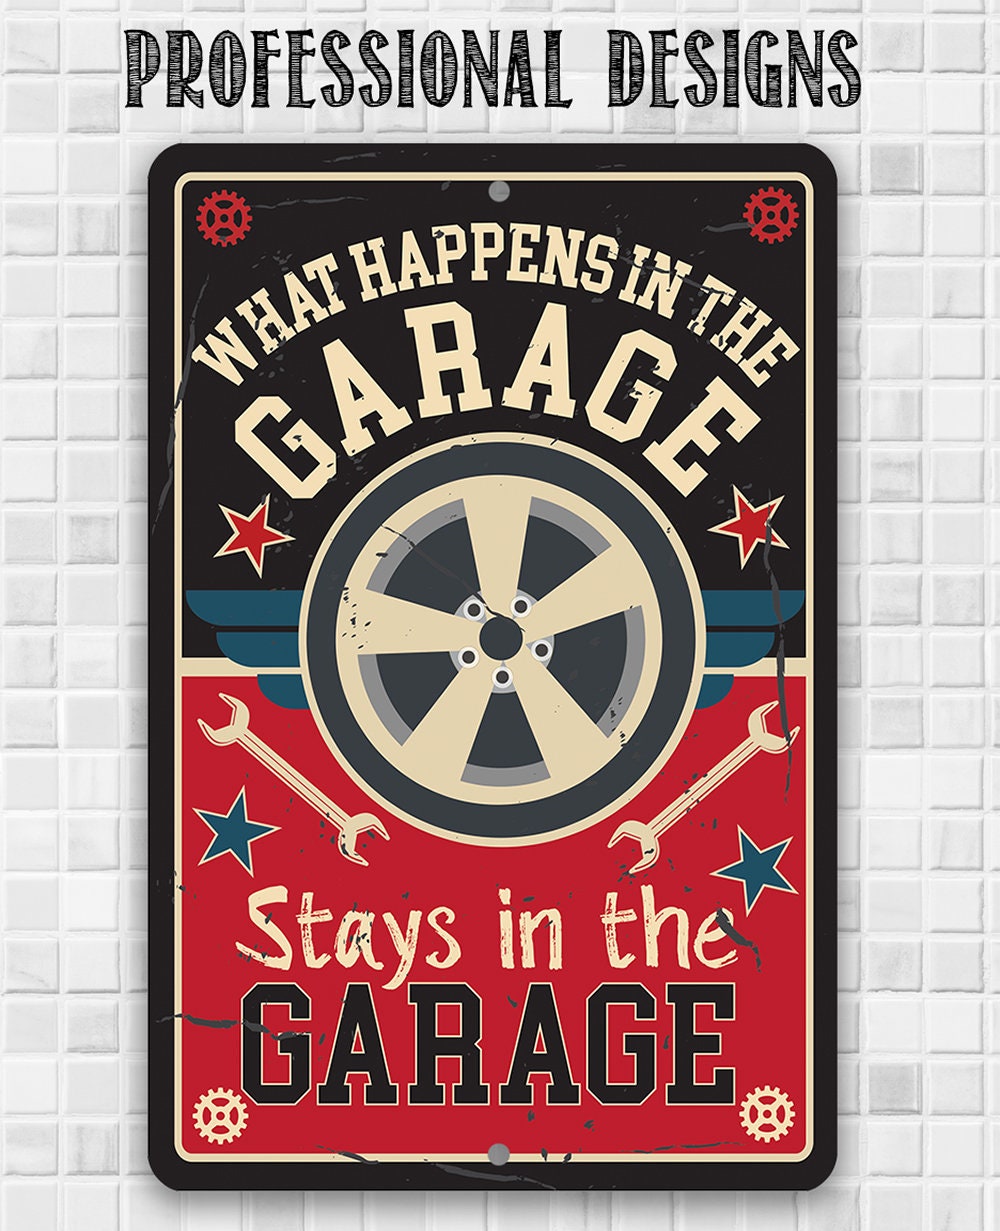 Tin - Metal Sign - What Happens in the Garage Stays in the Garage - Durable - Use Indoor/Outdoor - Repair Shop and Home Garage Decor Lone Star Art 